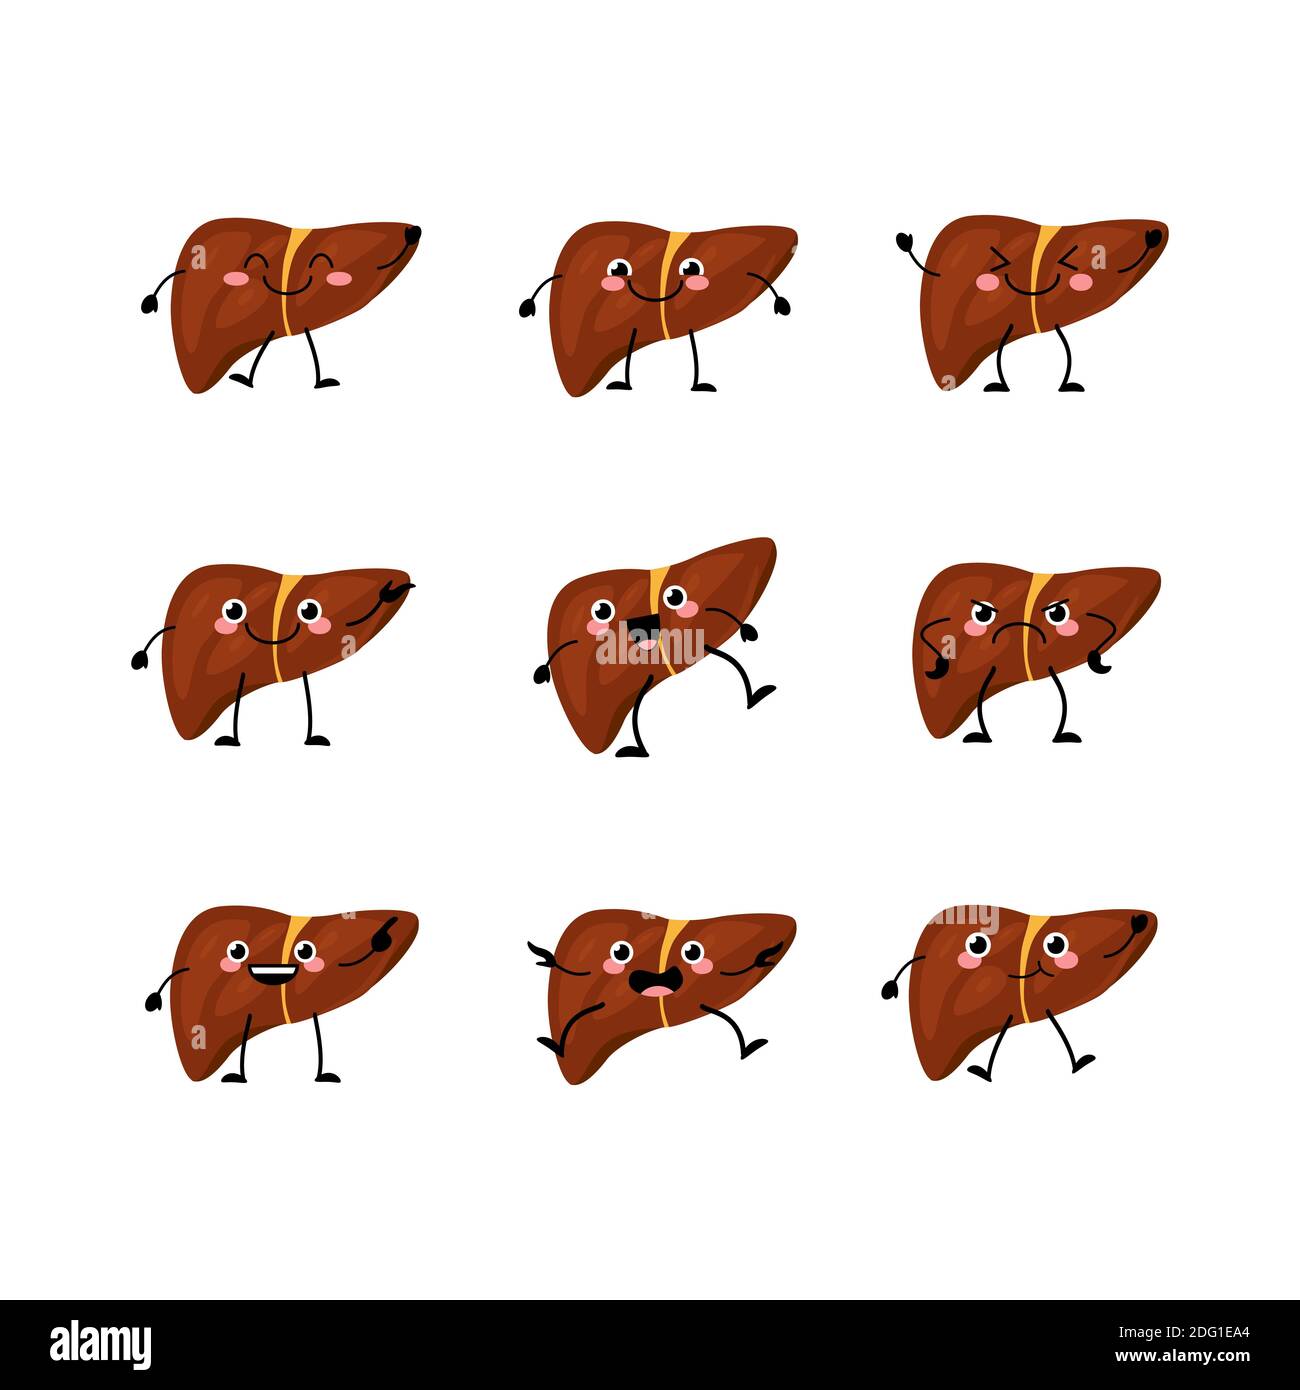 Cute liver organs character set in a flat cartoon style. Stock Vector